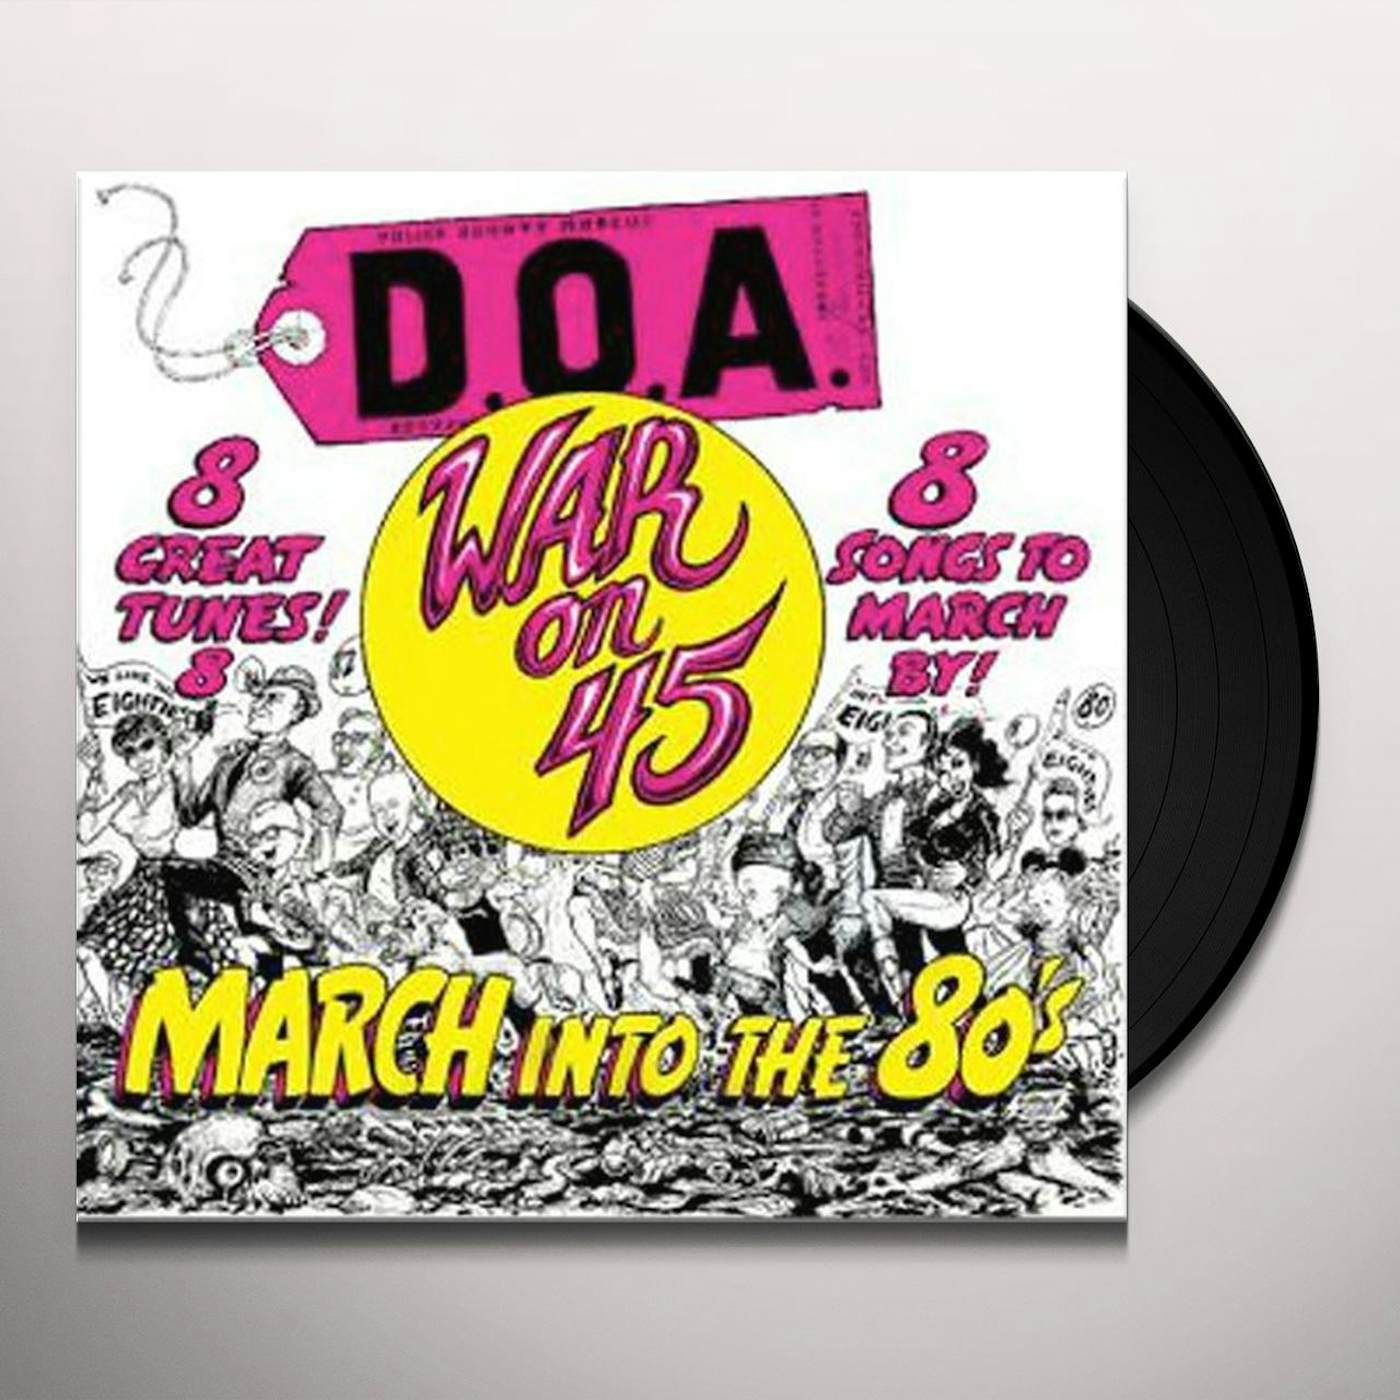 D.O.A. War On Record